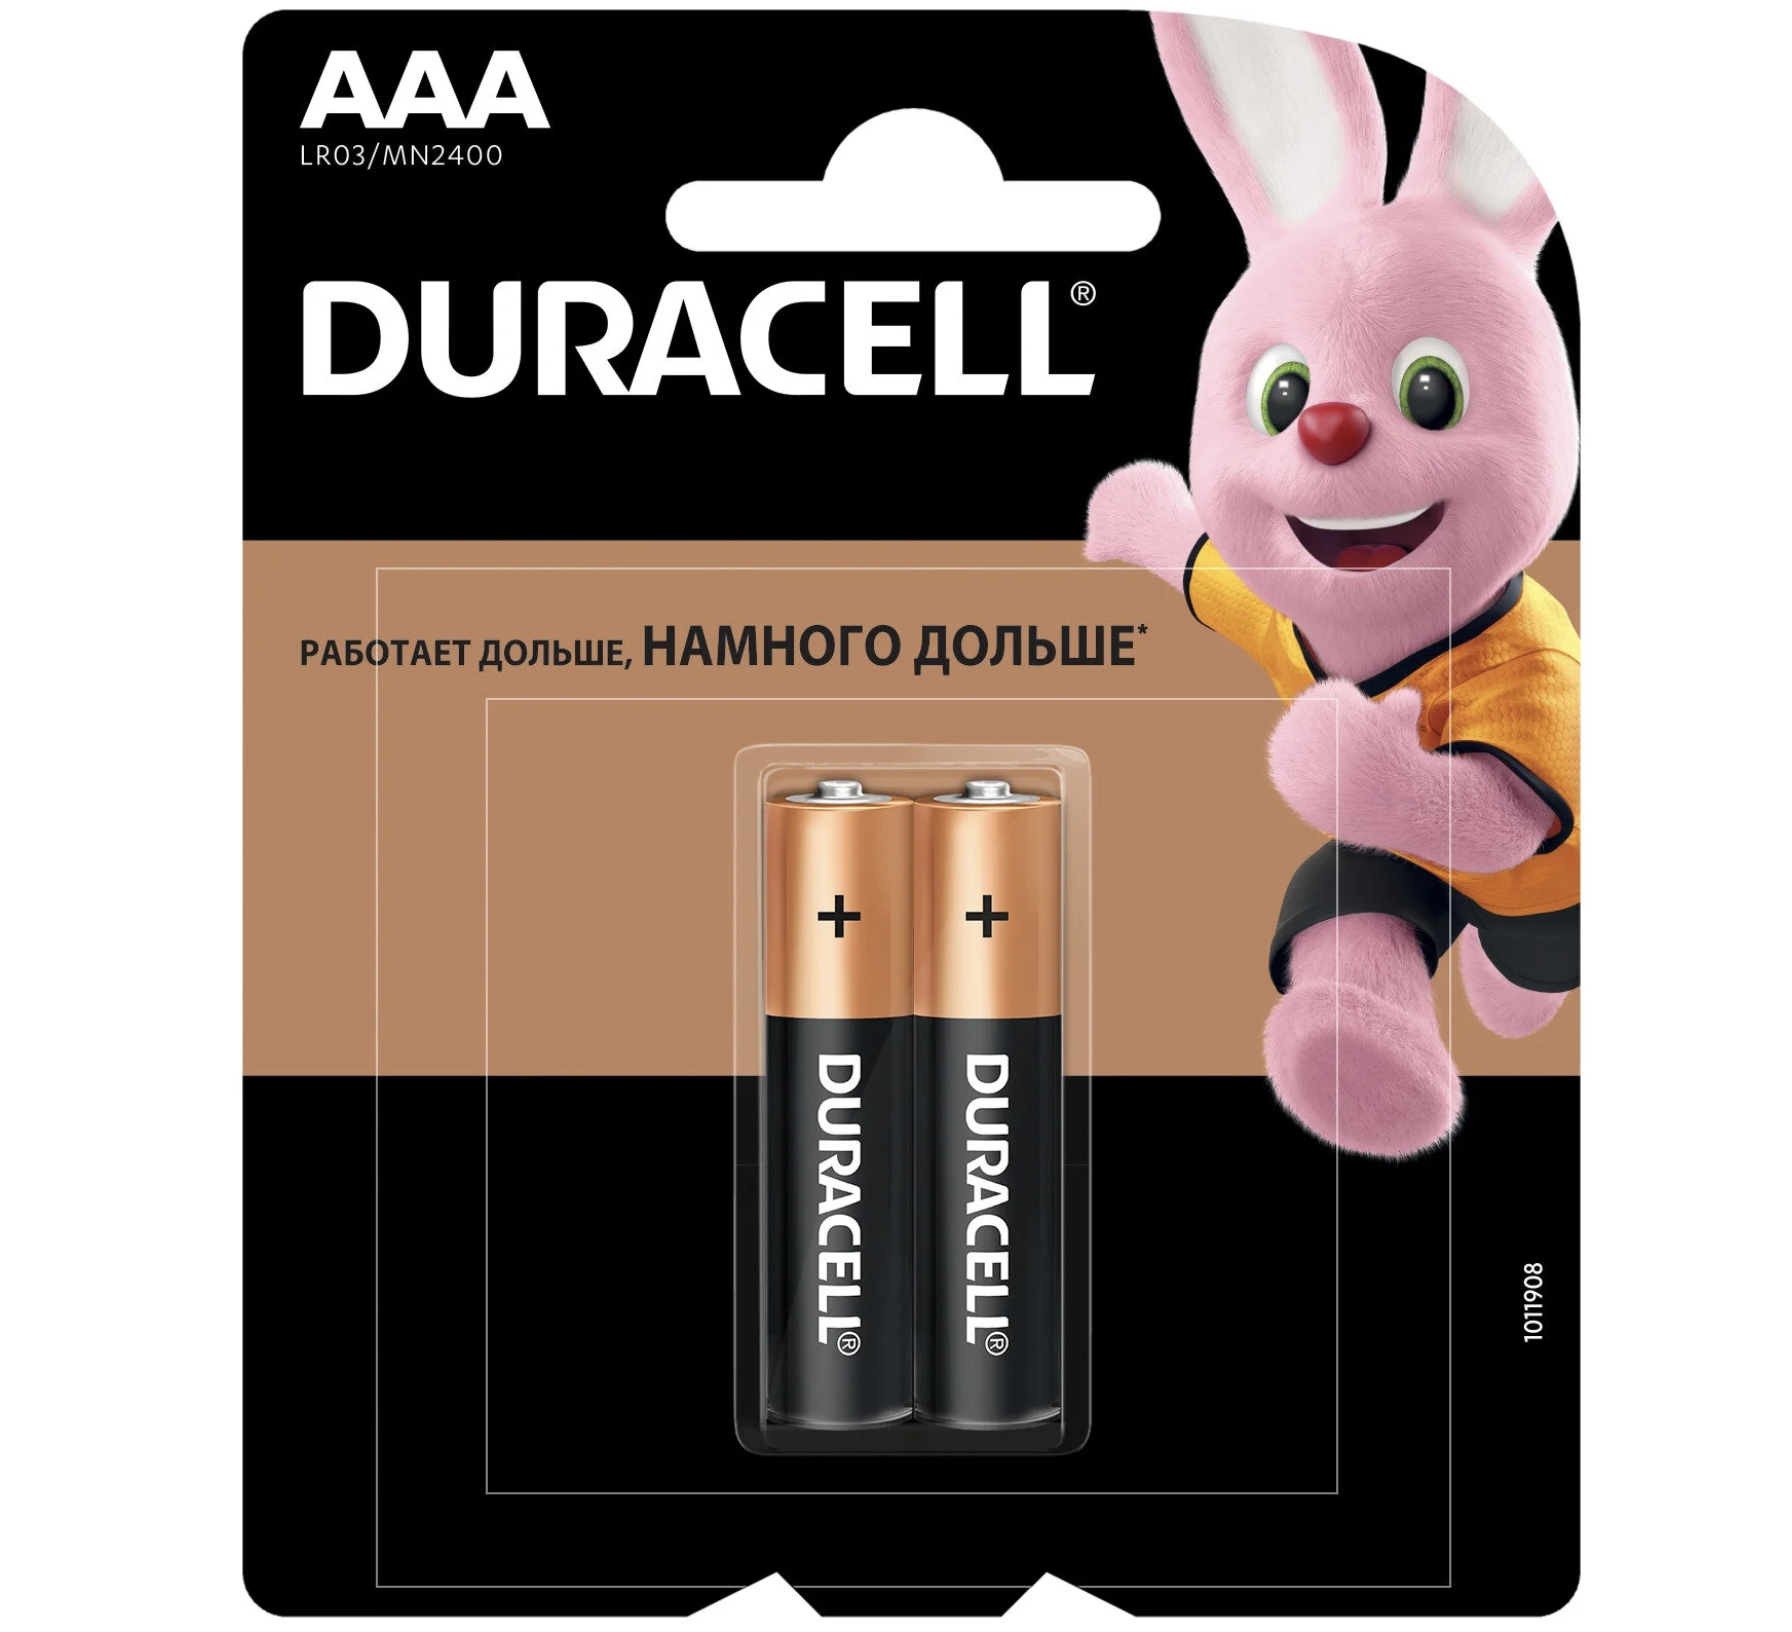   / Duracell -  Extra Life AAA LR03/MN2400 2 